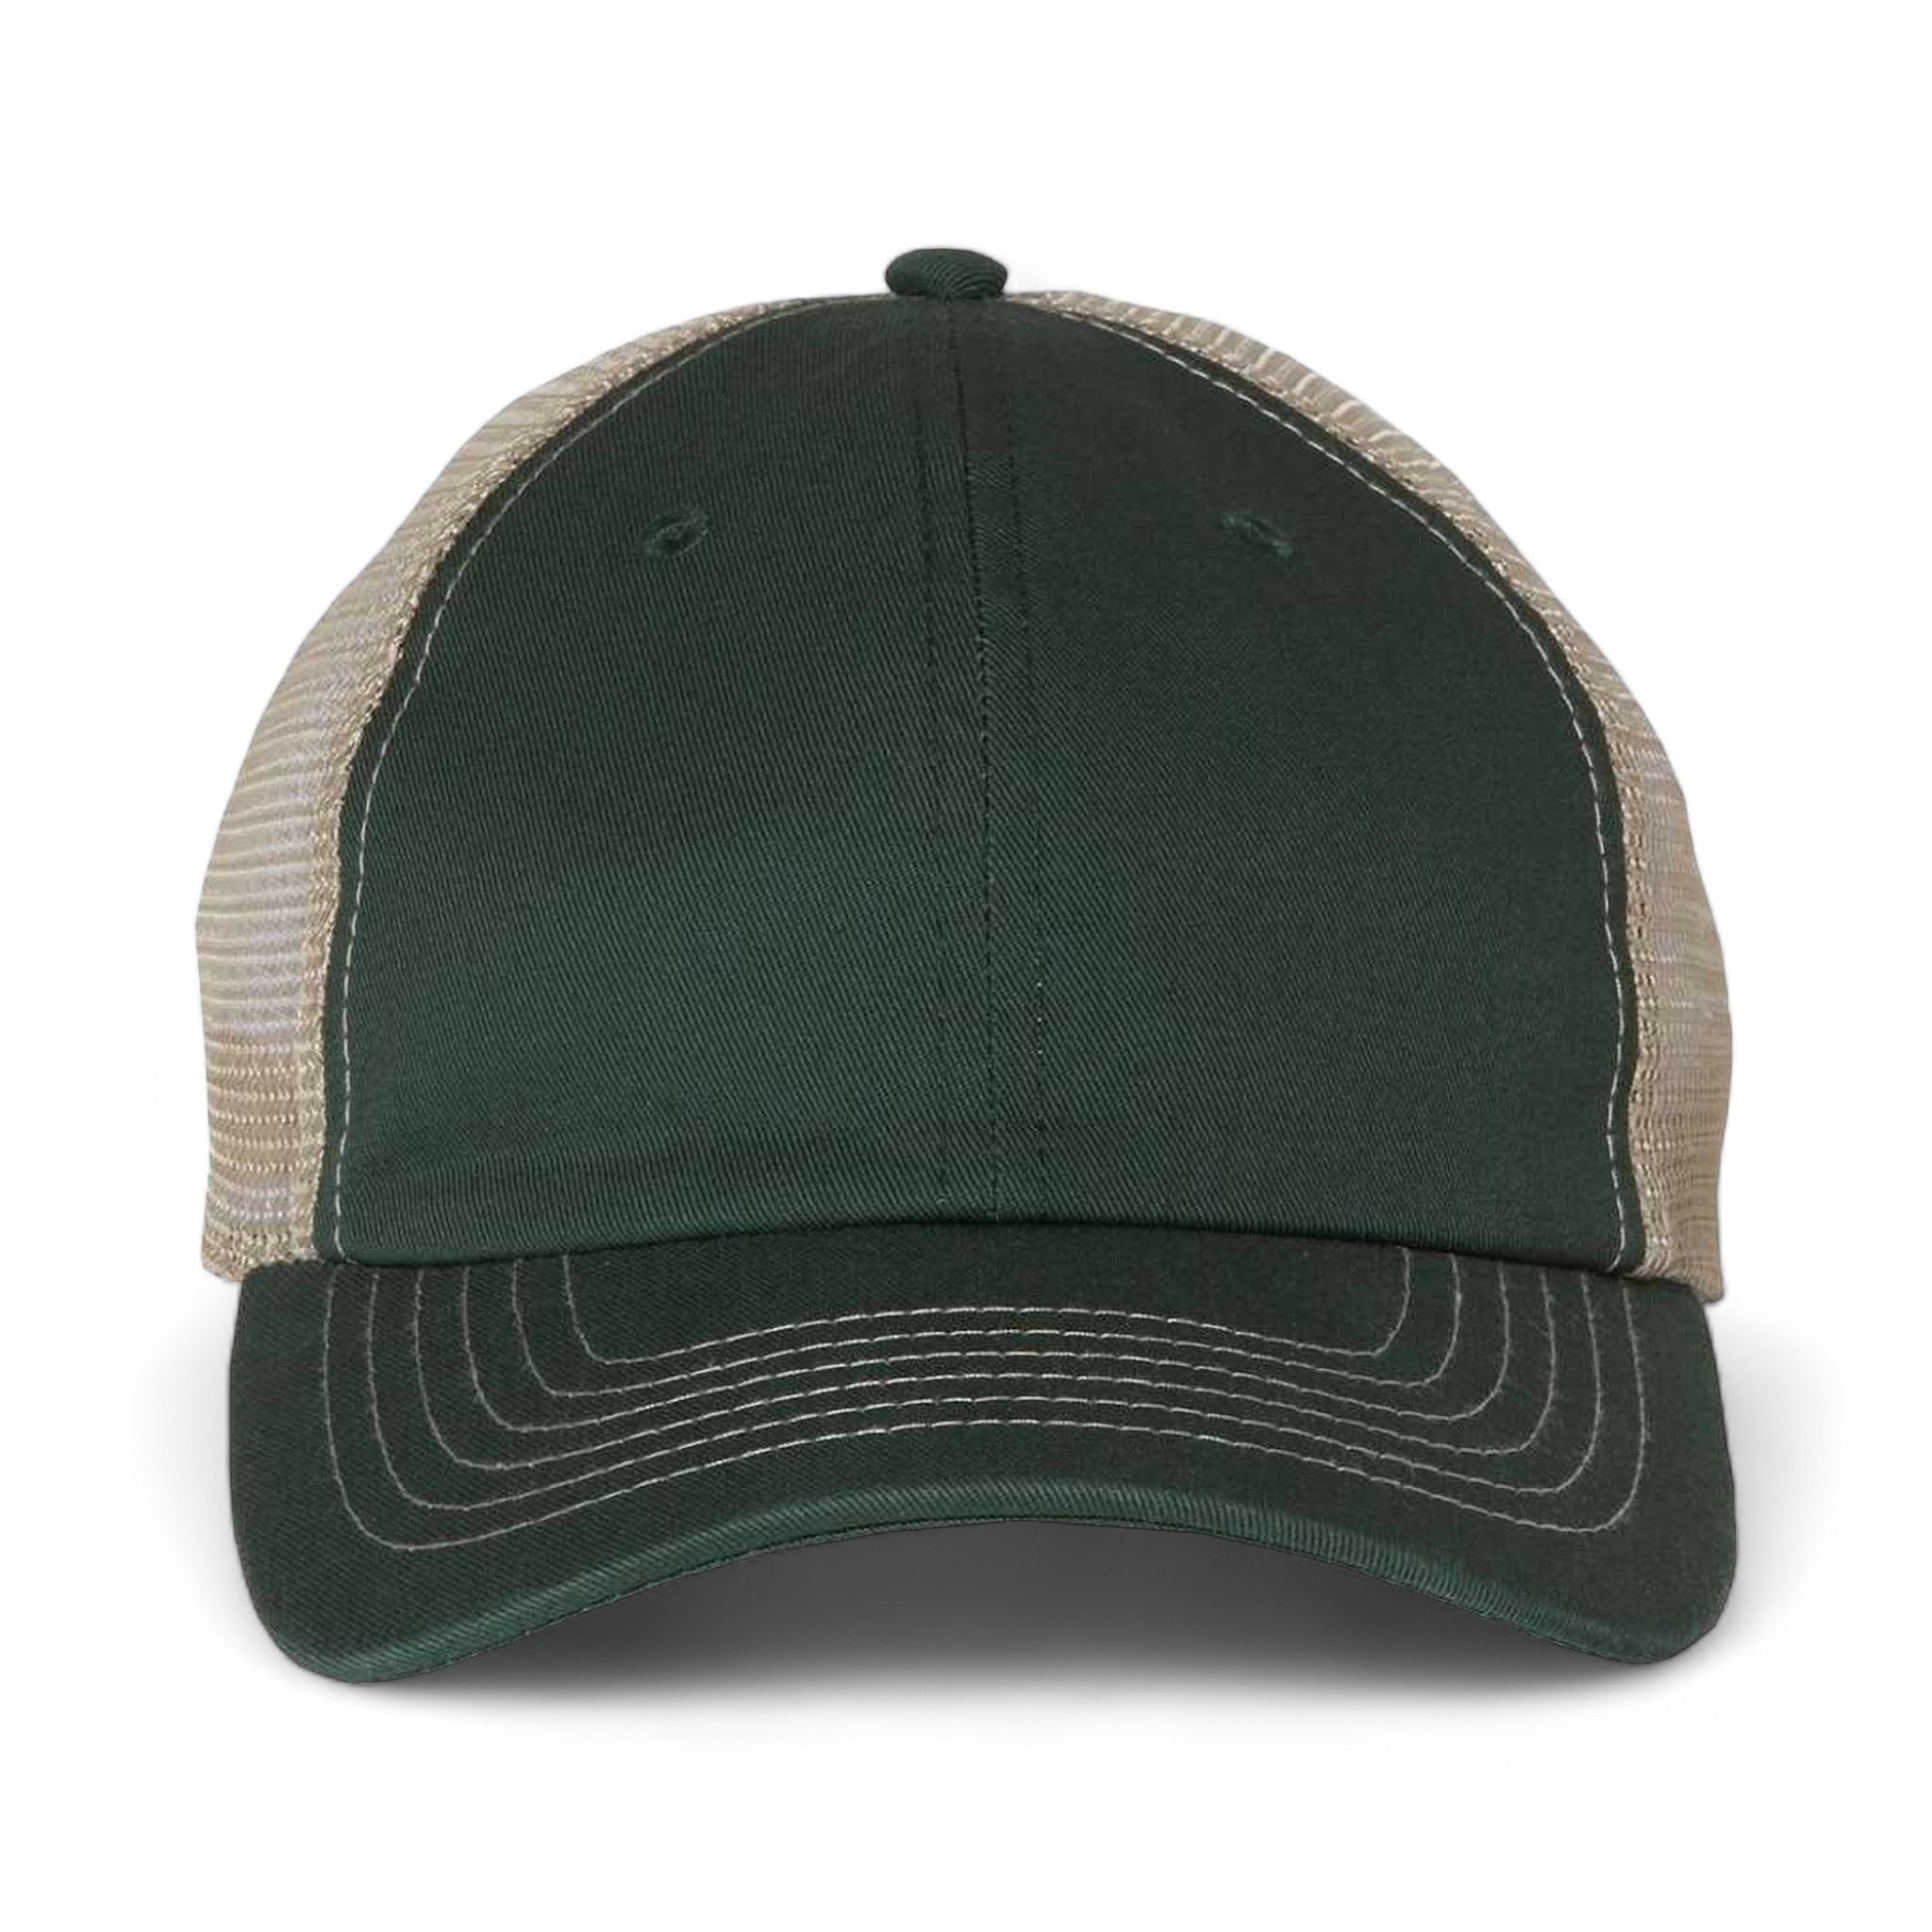 Front view of Sportsman 3100 custom hat in forest and khaki